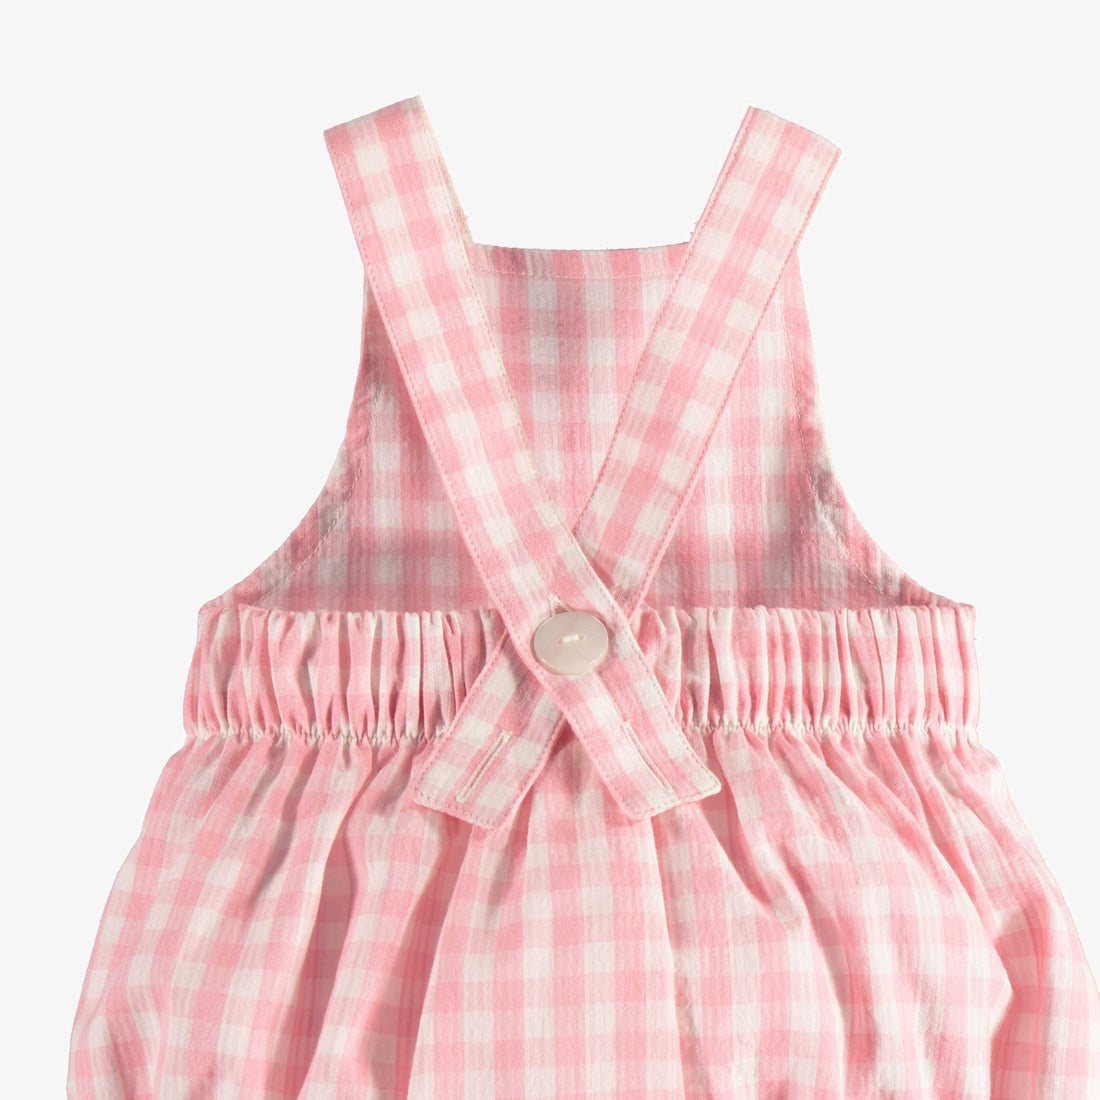 PINK AND WHITE PLAID ONE-PIECE WITH LARGE STRAPS IN SEERSUCKER, NEWBORN